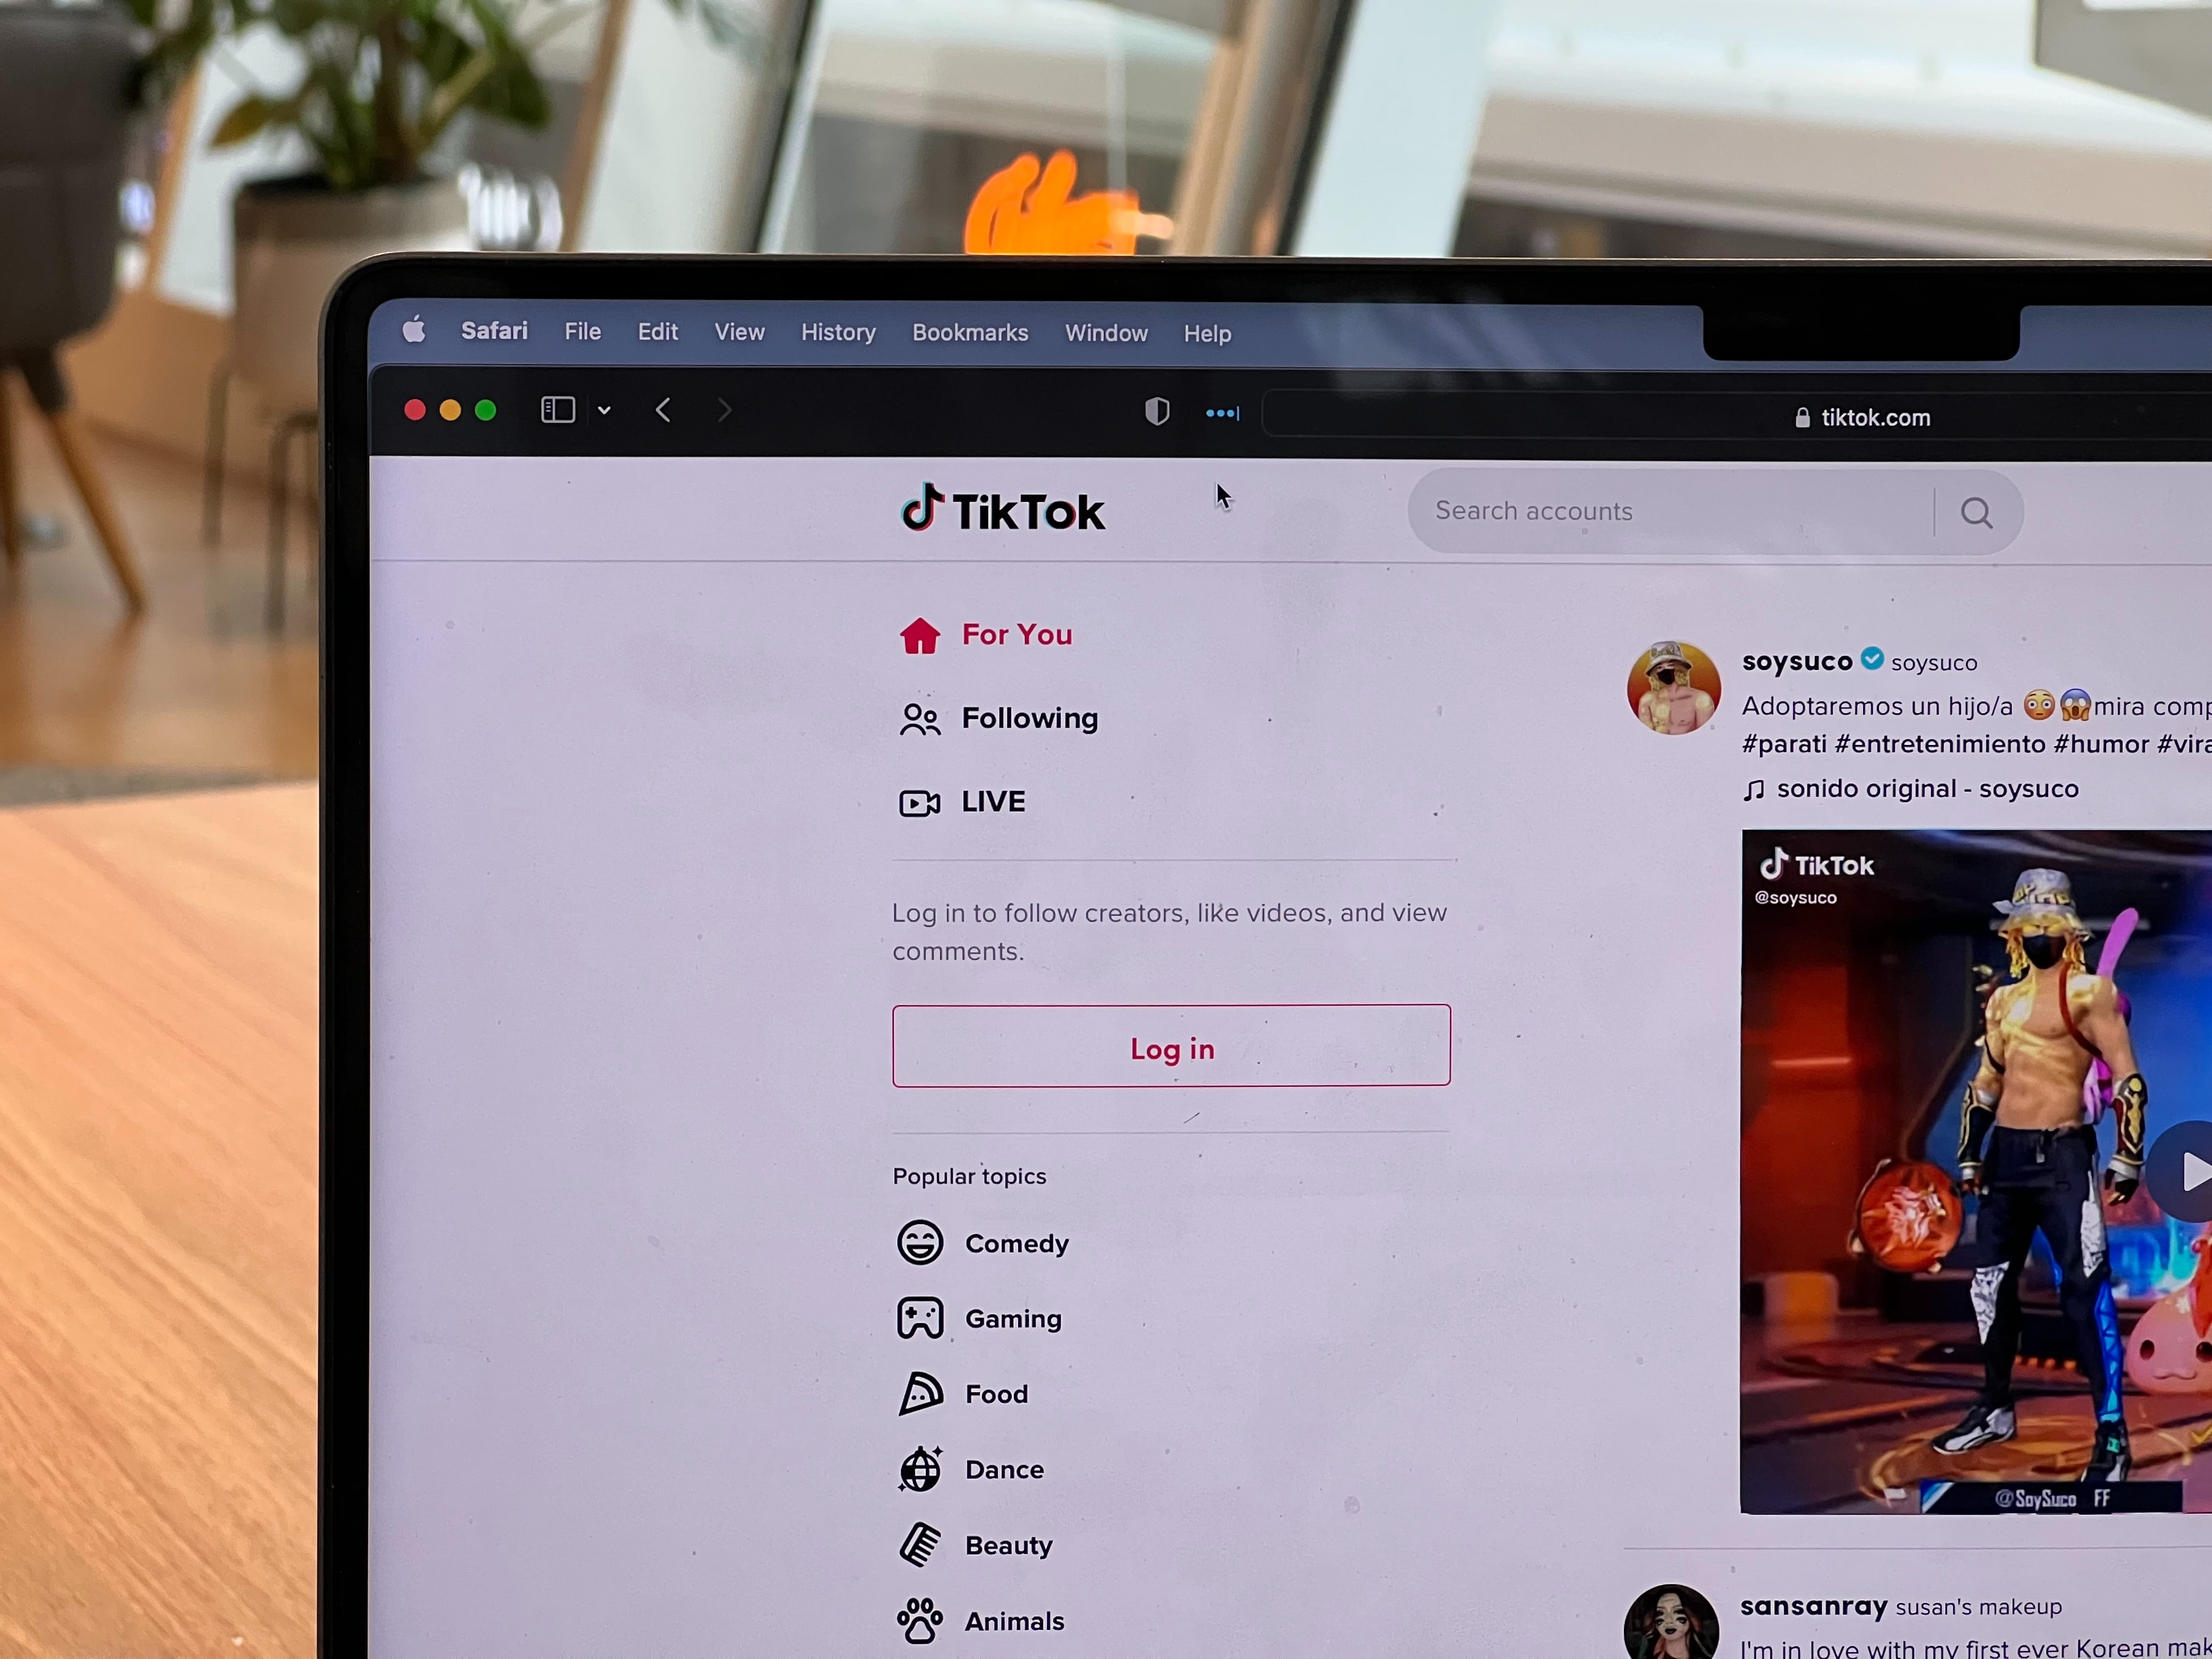 How to Get More Views on TikTok- Expert Strategies for Increasing Engagement